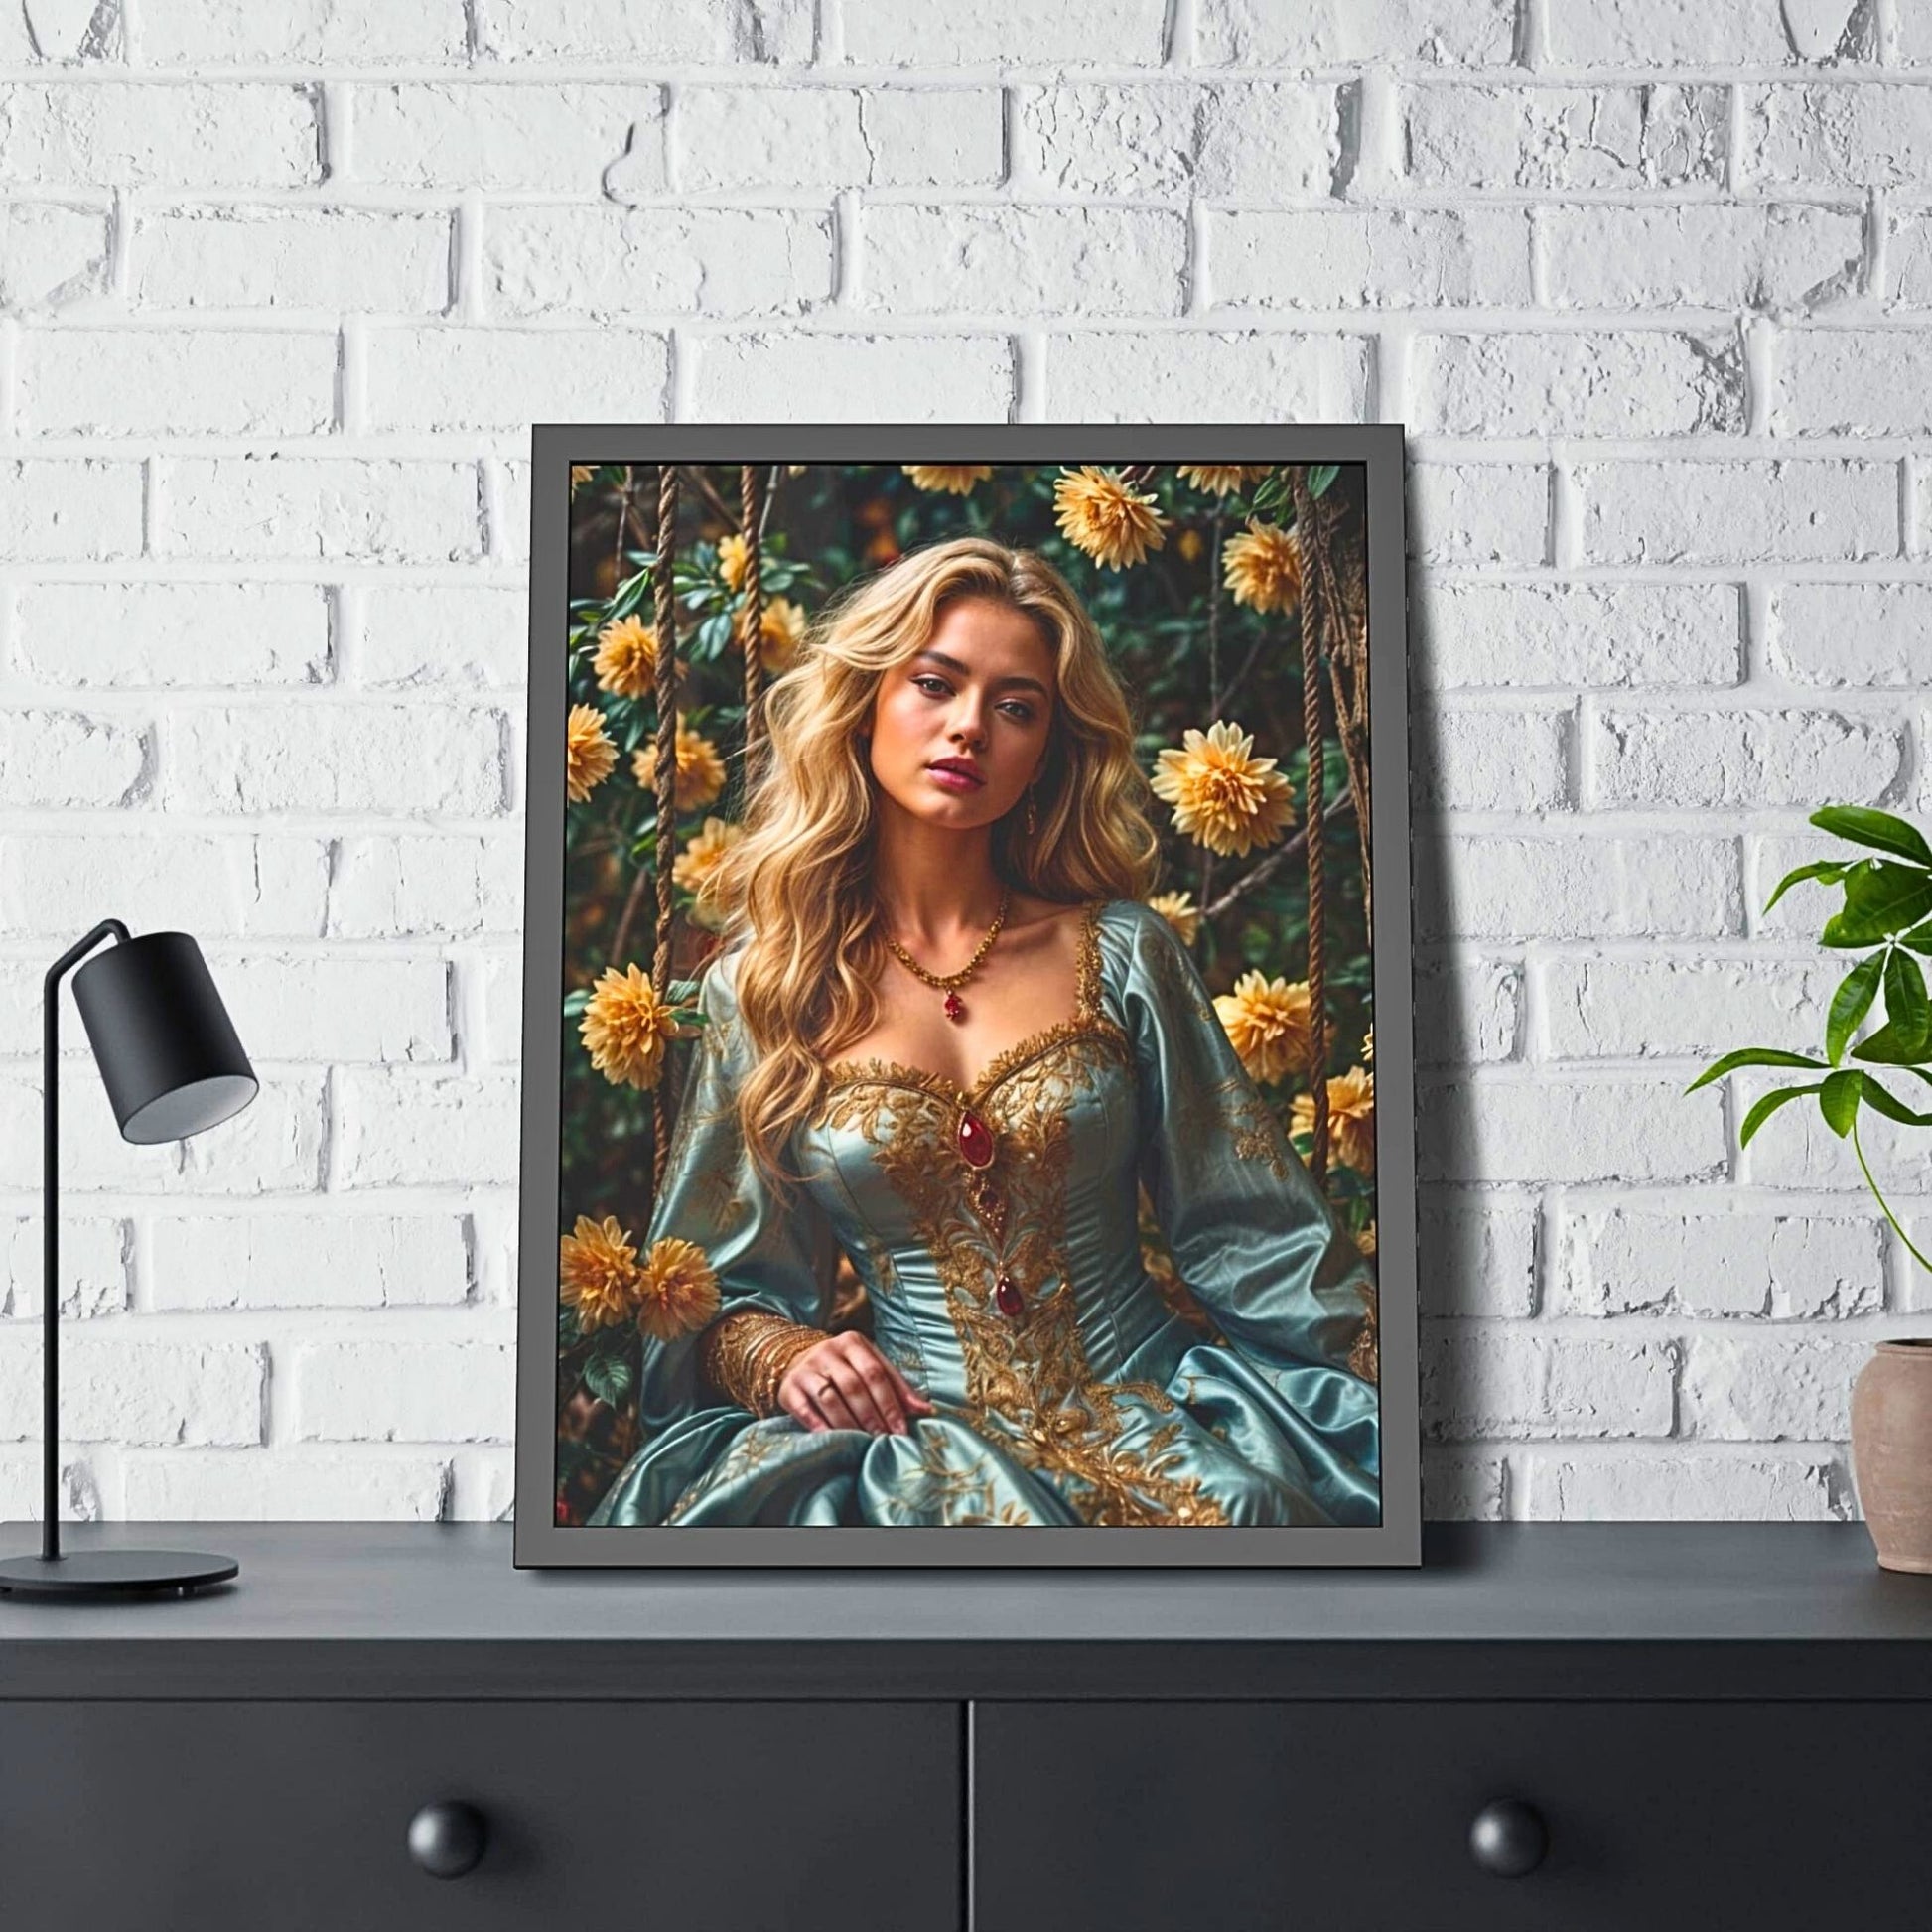 Celebrate her with a custom royal queen portrait, crafted from your photo in a Renaissance style. This historical portrait makes a regal birthday gift, capturing her essence with elegance and grace. Ideal for women who appreciate personalized art and unique gifts.